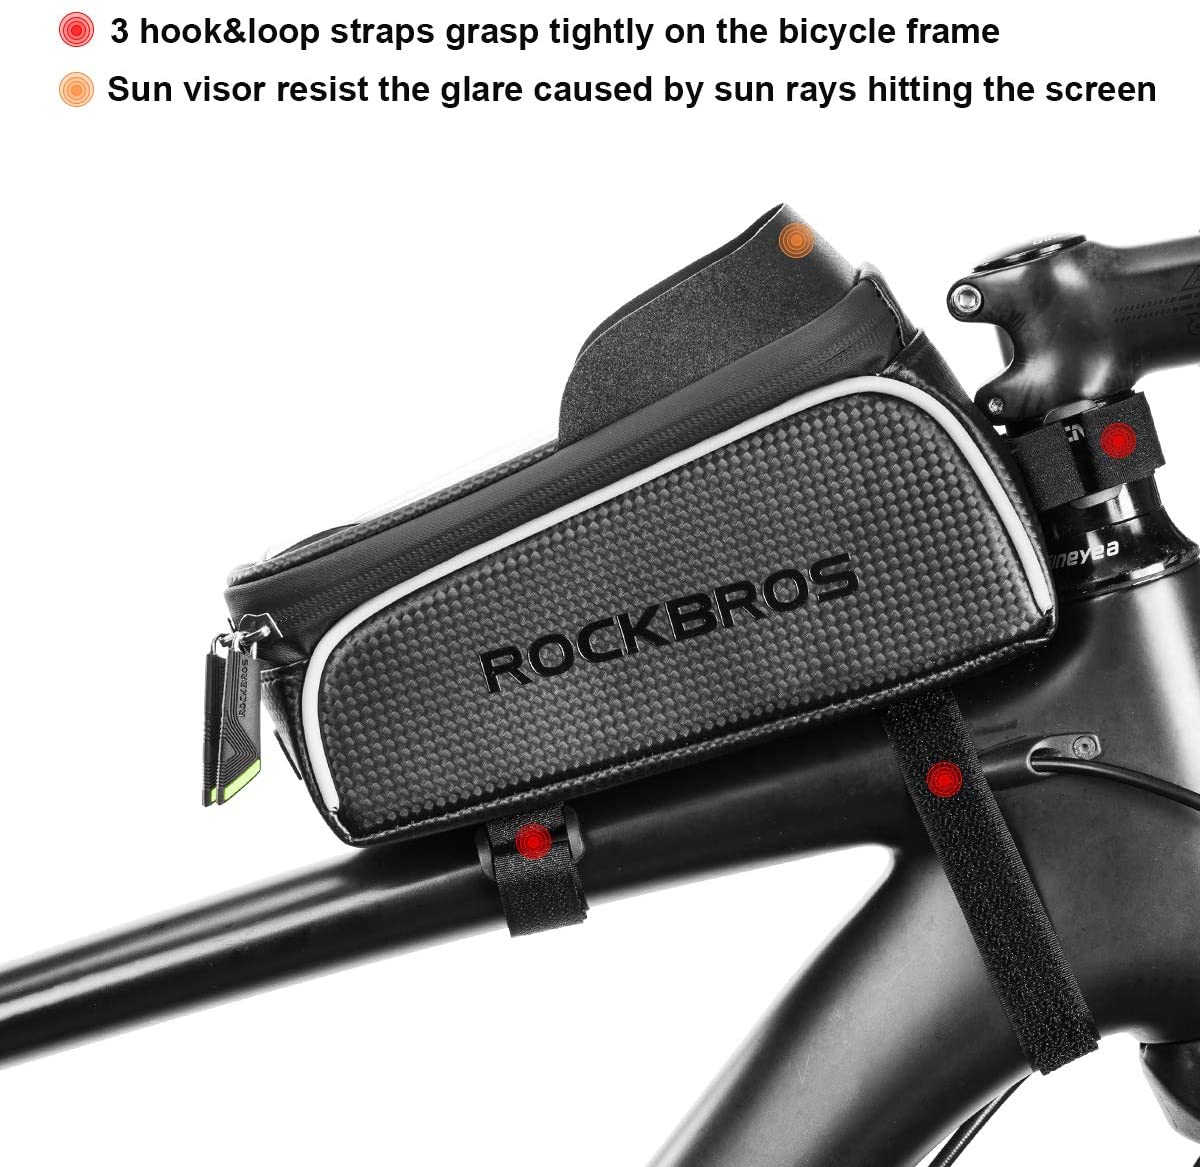 Top Tube Bike Bag With Phone Case Holder Plastic Cover for MTB Mountain Road Commuter Ebike Tourer or Scooter Rockbros